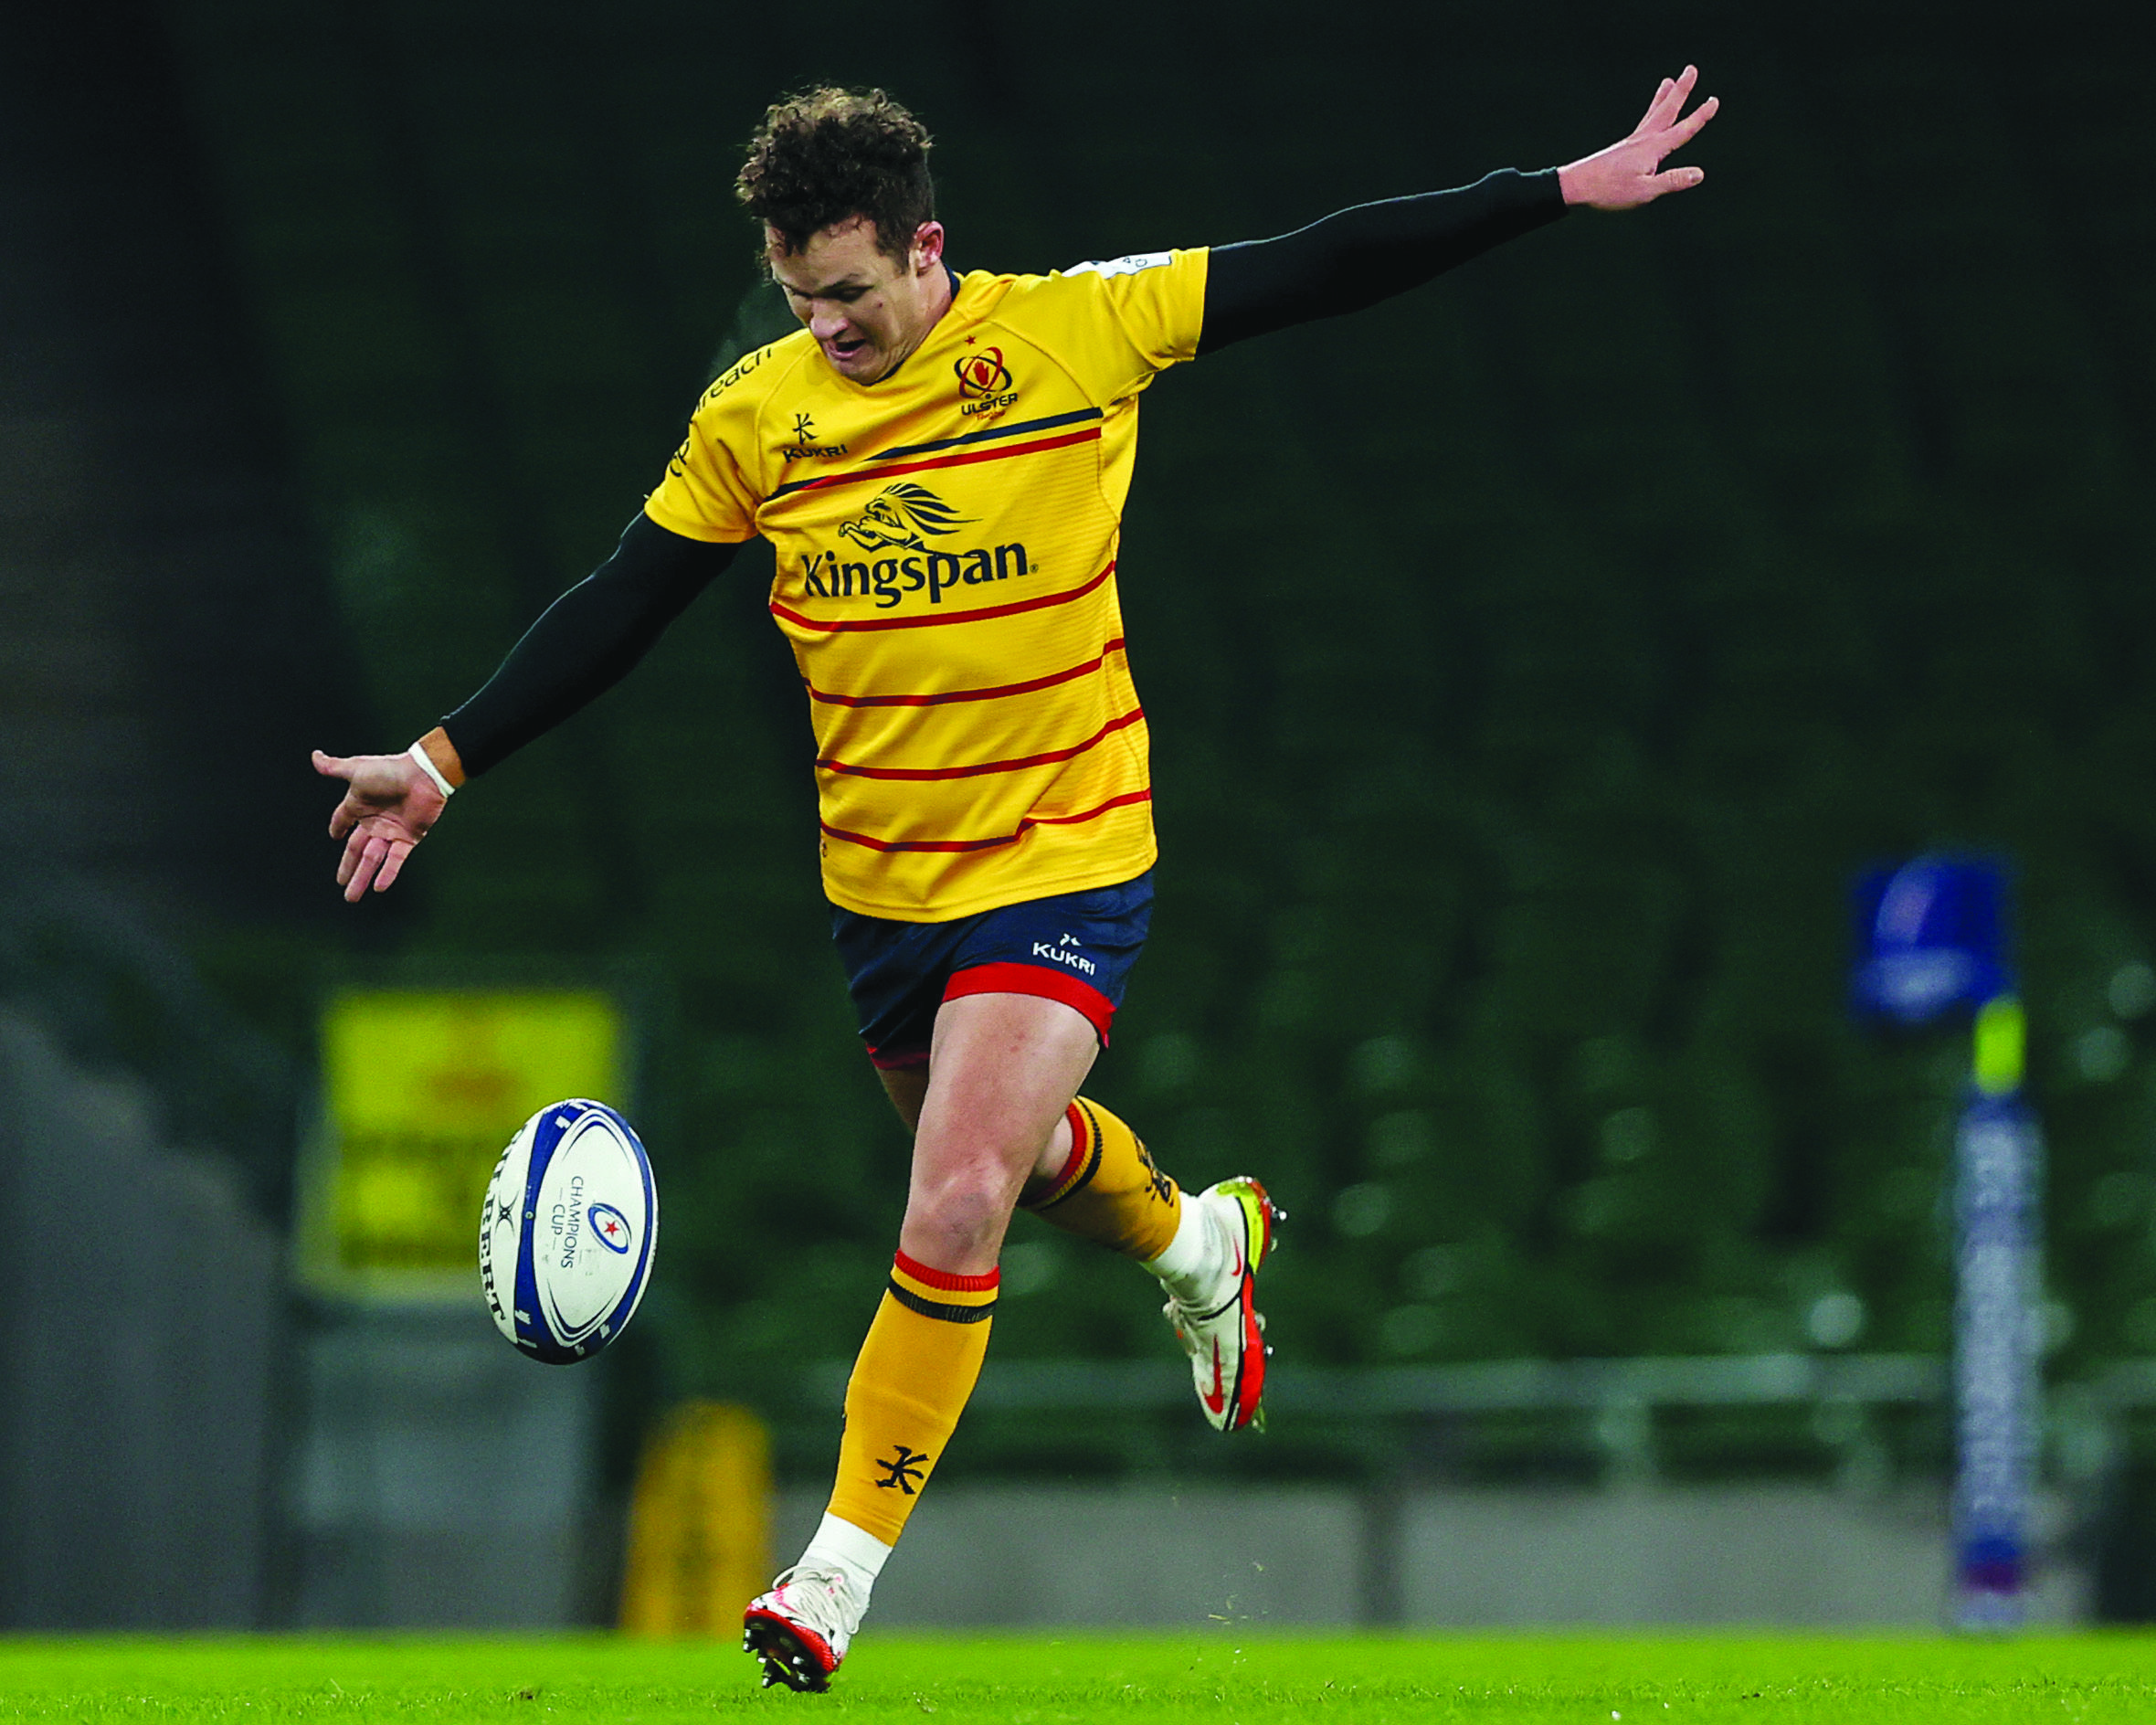 Billy Burns suffered a concussion in Saturday’s defeat to Stade Rochelais so misses Friday’s trip to Galway